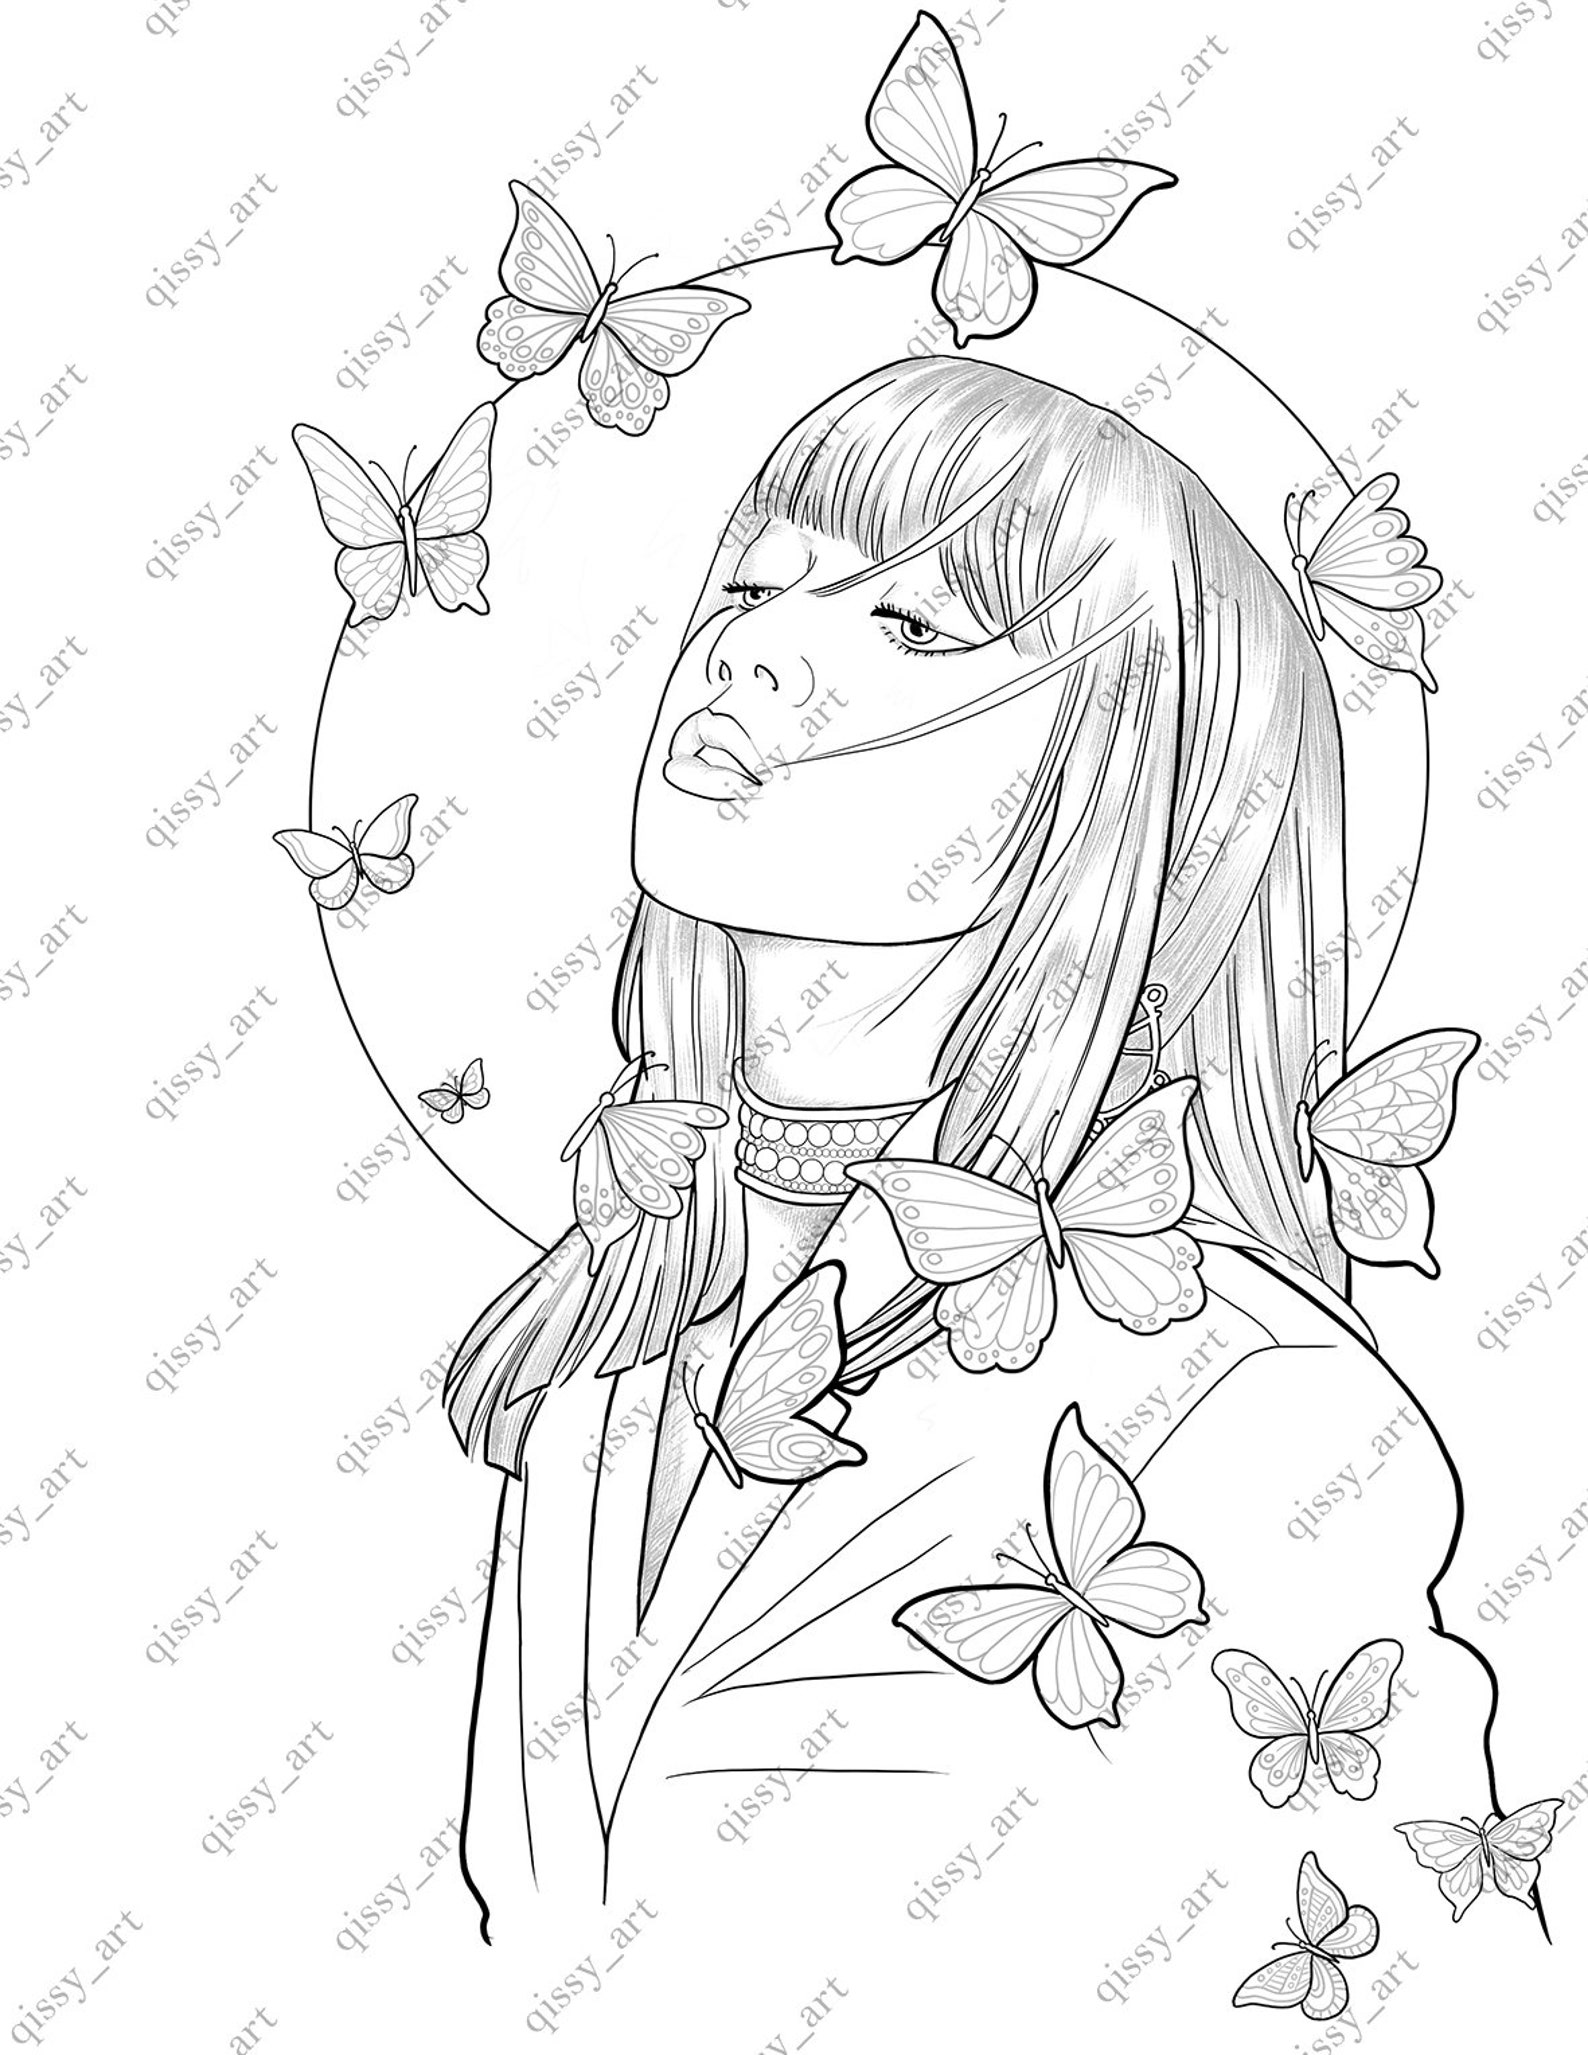 Chibi Lisa Blackpink Coloring Pages Blackpink Coloring Pages | Images ...